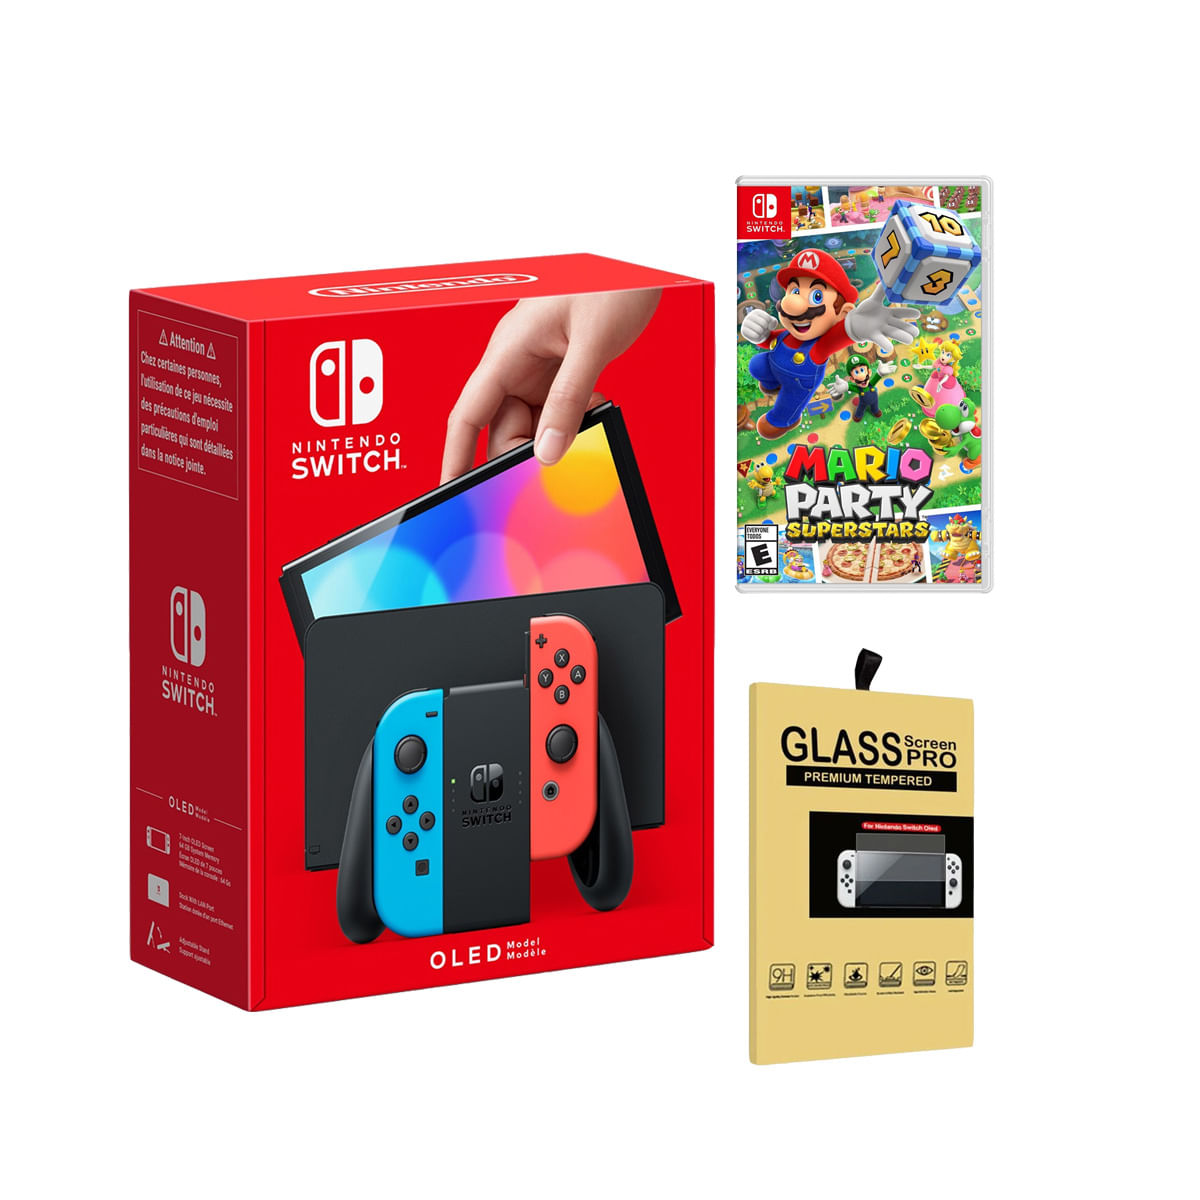 Consola Nintendo Switch Oled Neon + Mario Party Superstars + Mica